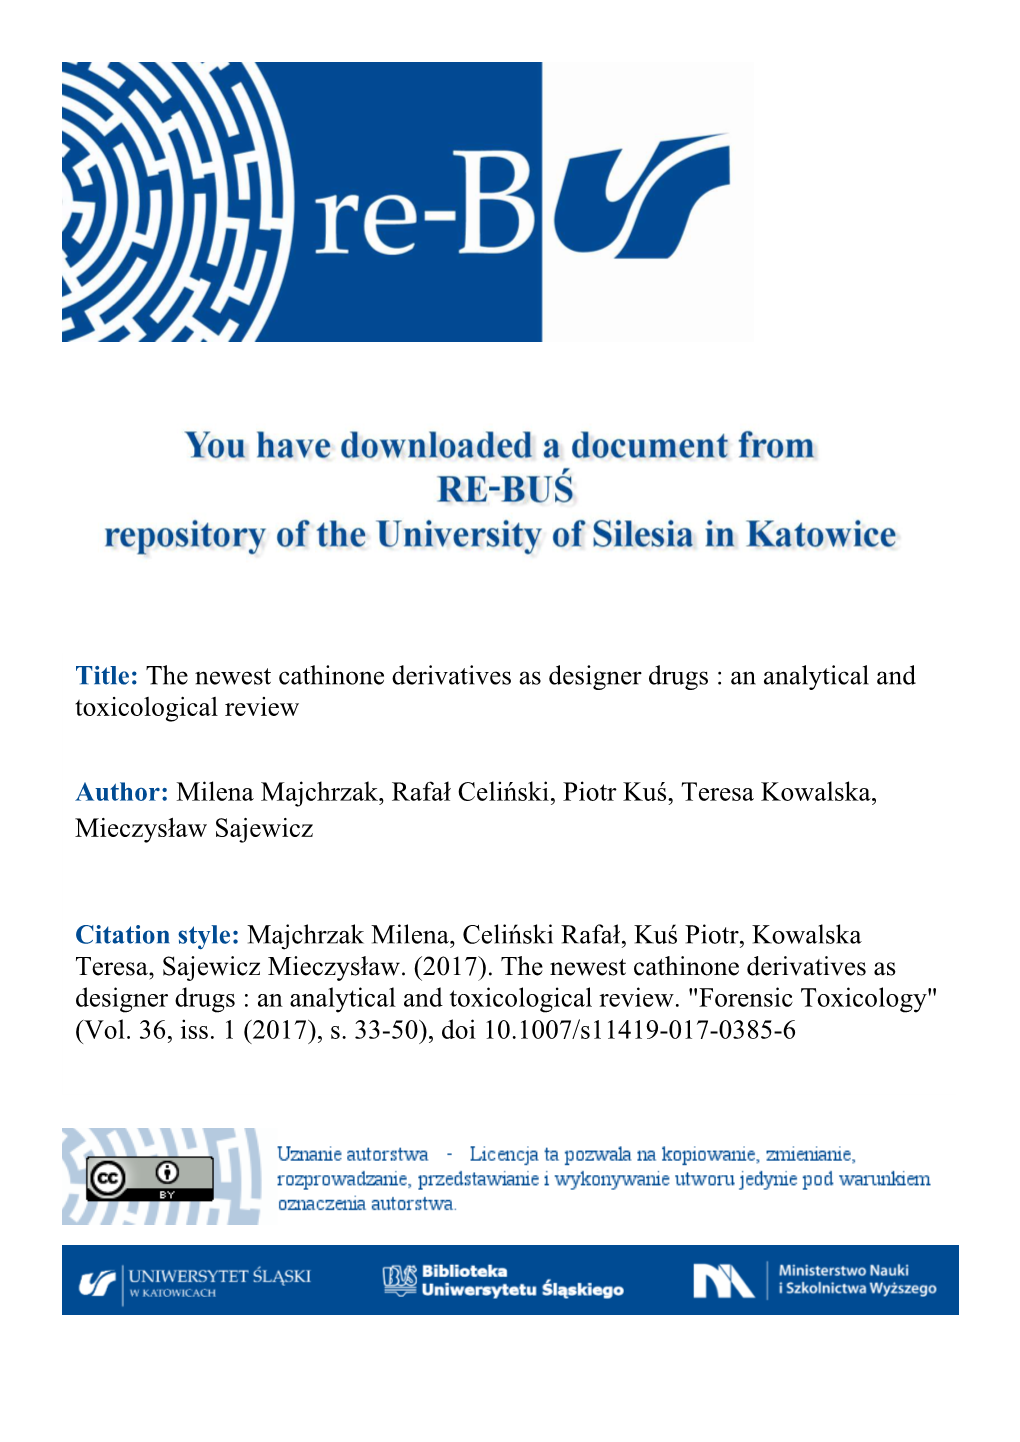 The Newest Cathinone Derivatives As Designer Drugs : an Analytical and Toxicological Review